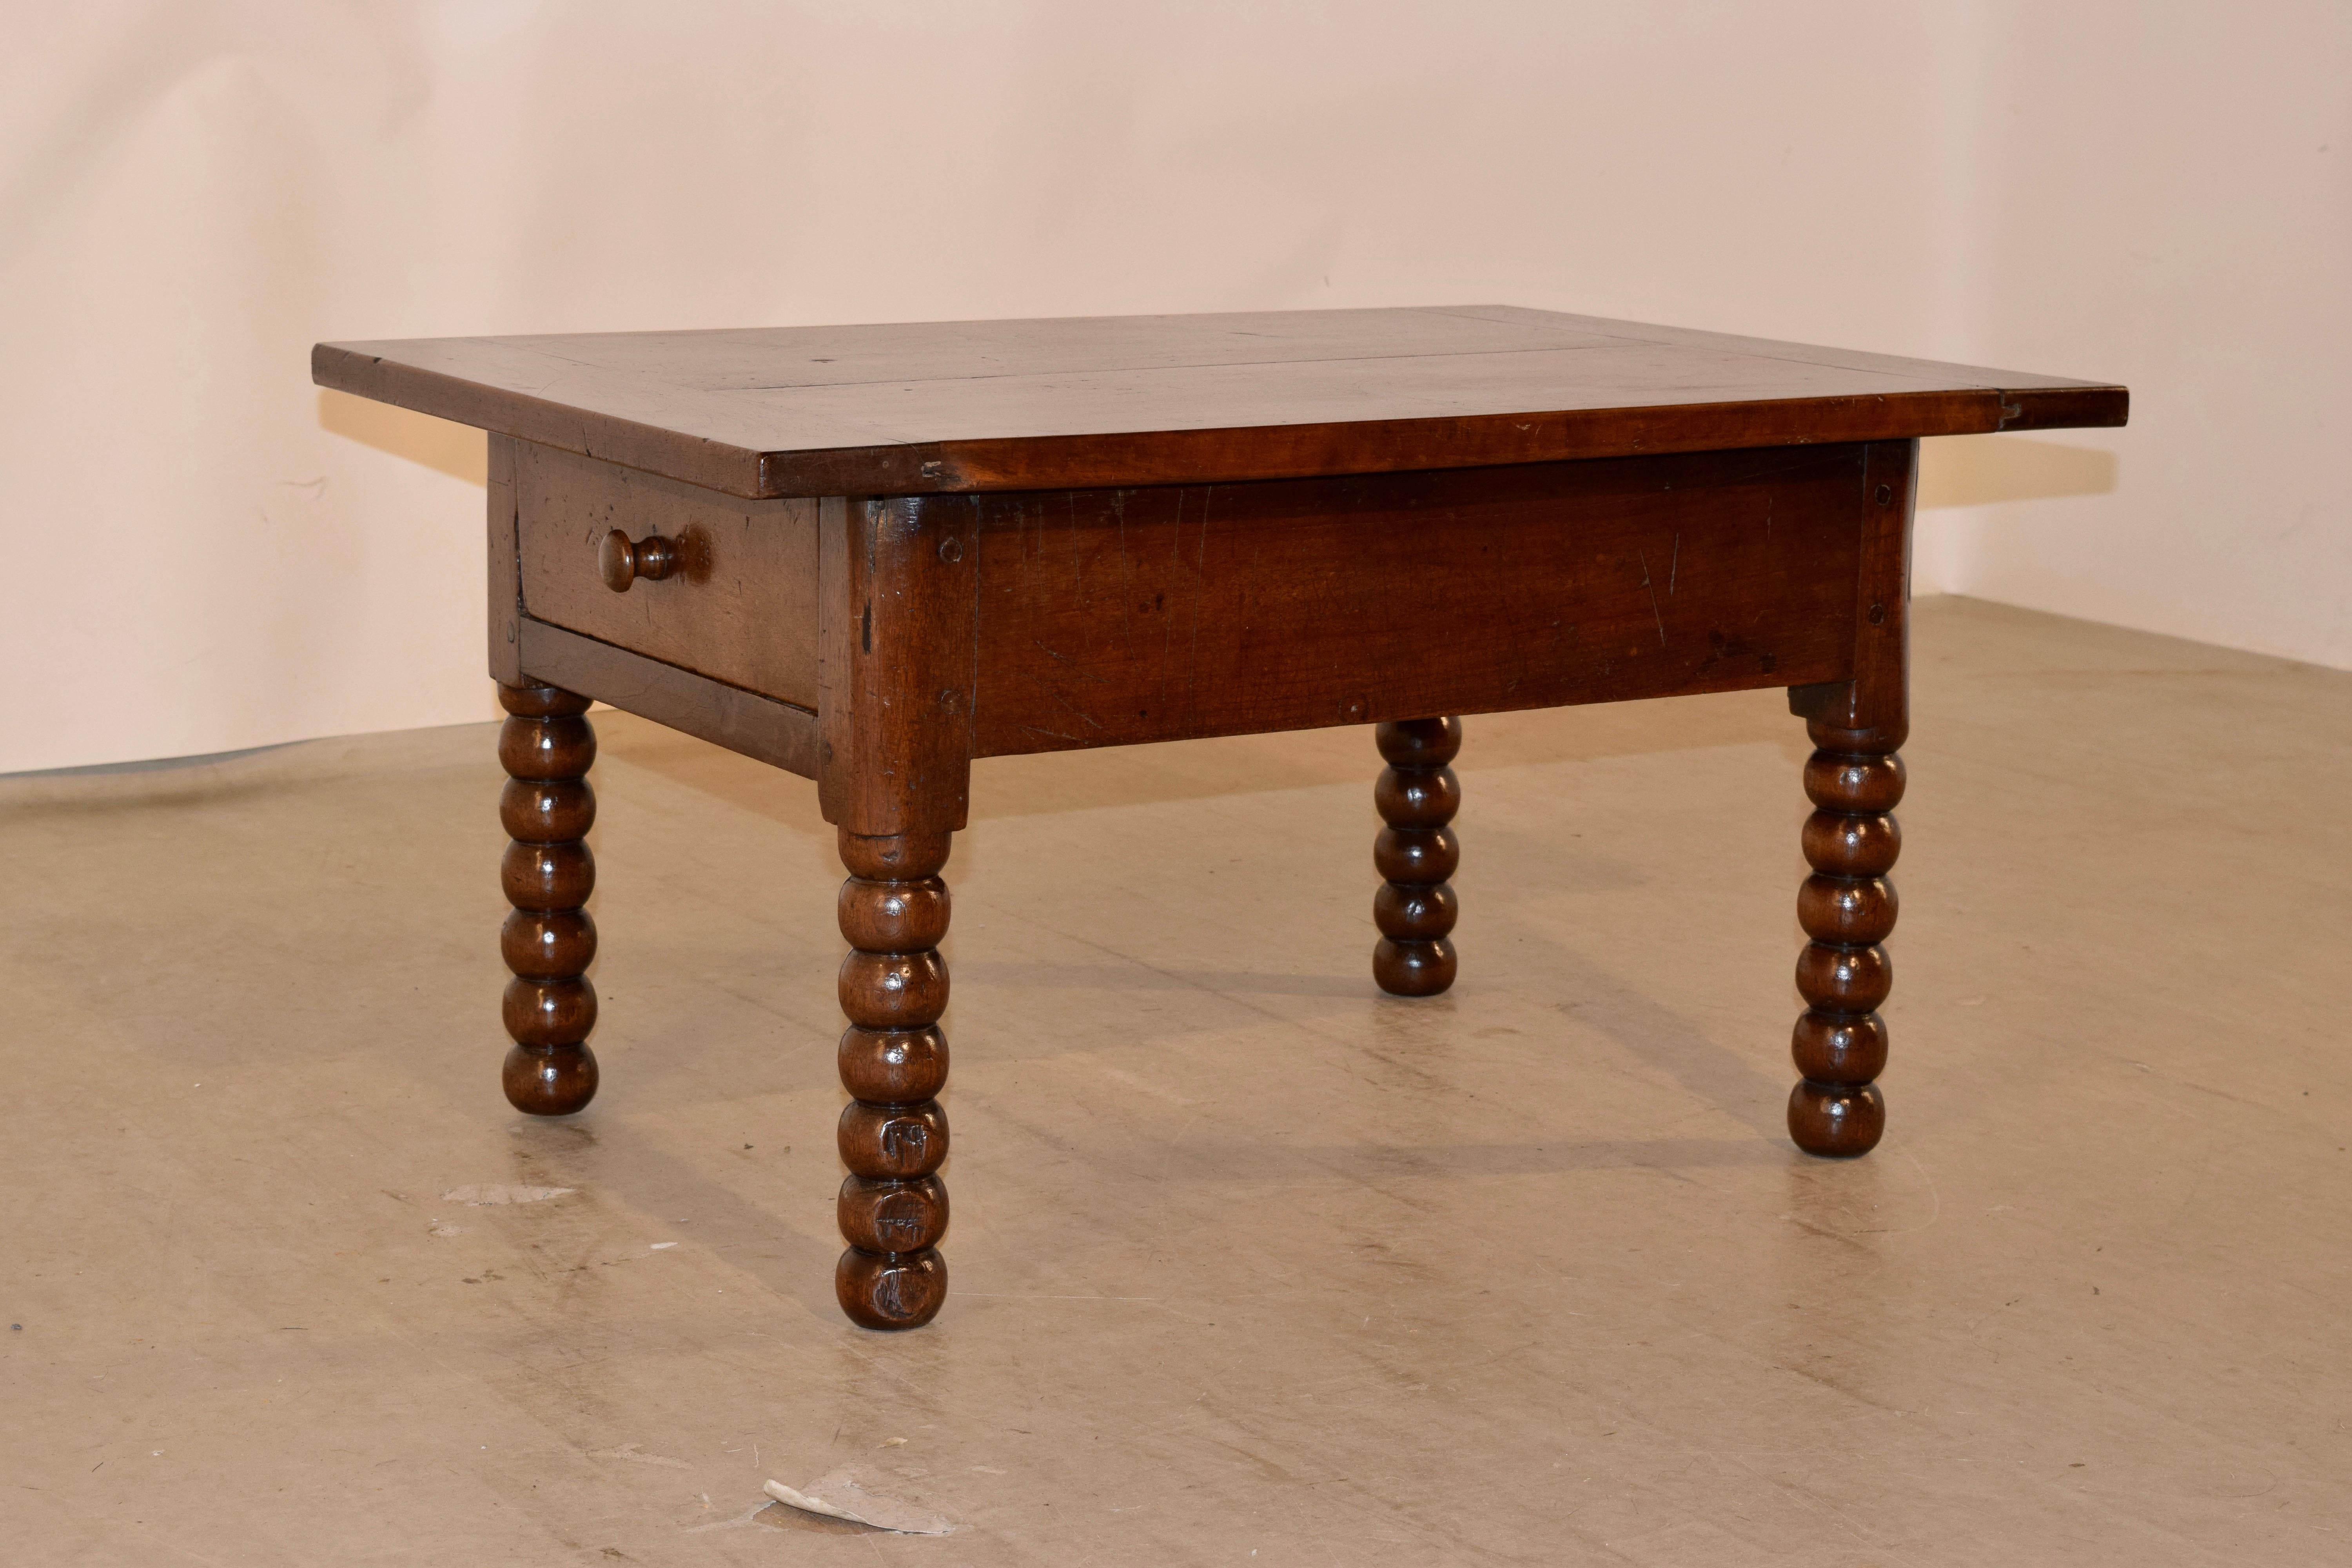 Early 19th century walnut coffee table from France. The top is made from two thick boards and has banded ends, following down to a simple apron, which contains a single drawer and is raised on hand-turned bobbin legs.